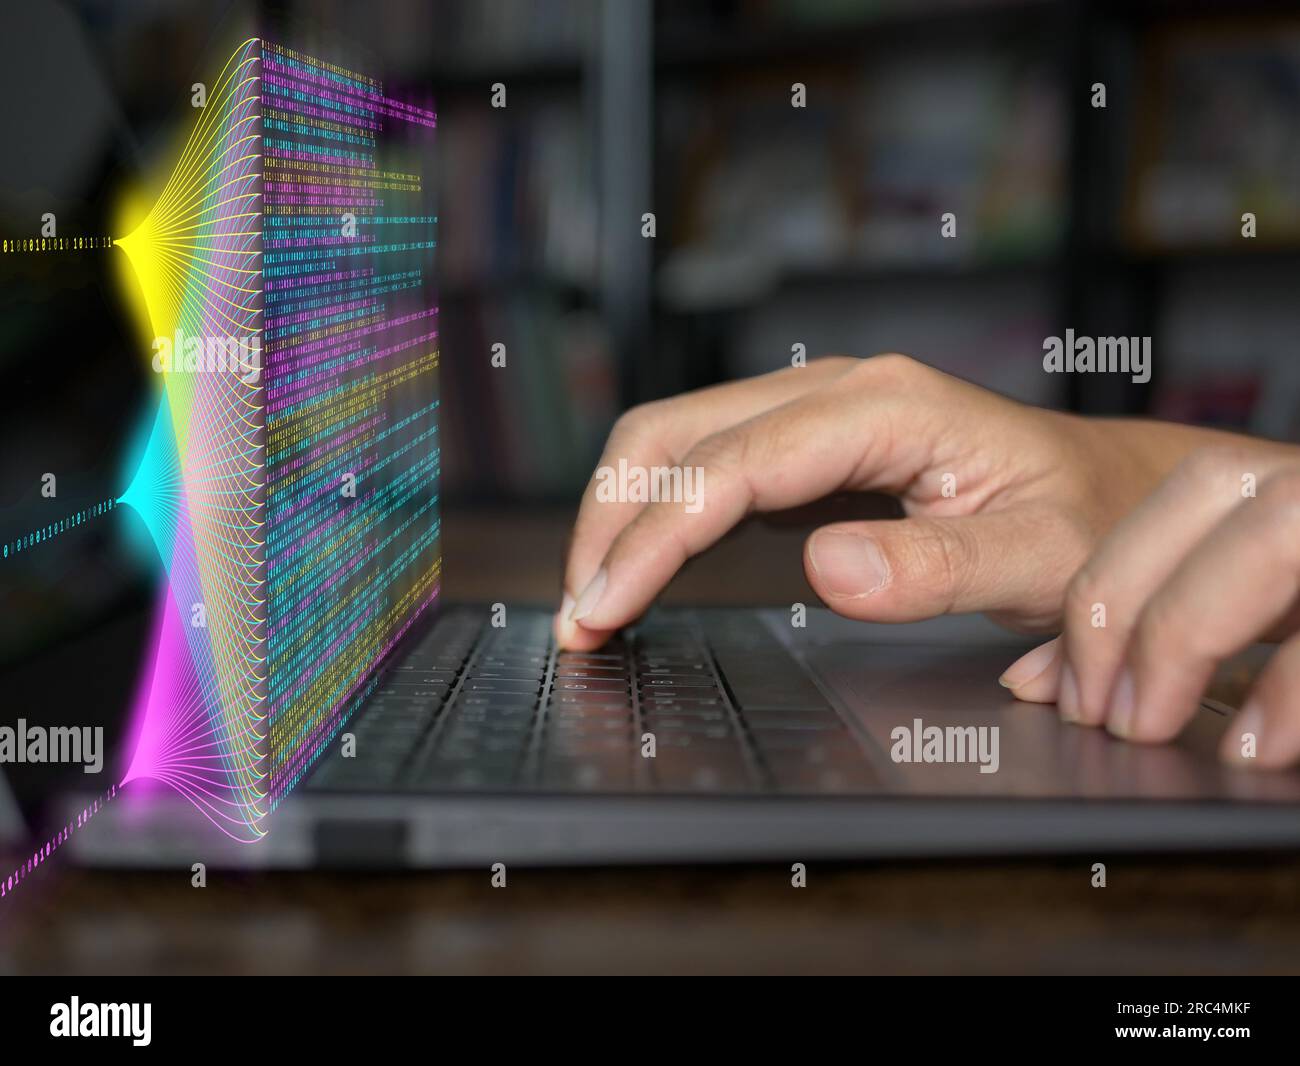 Big data and data science concepts. A man is computing, analysing and extracting complex statistic data set on a computer. Data mining technology, Bus Stock Photo